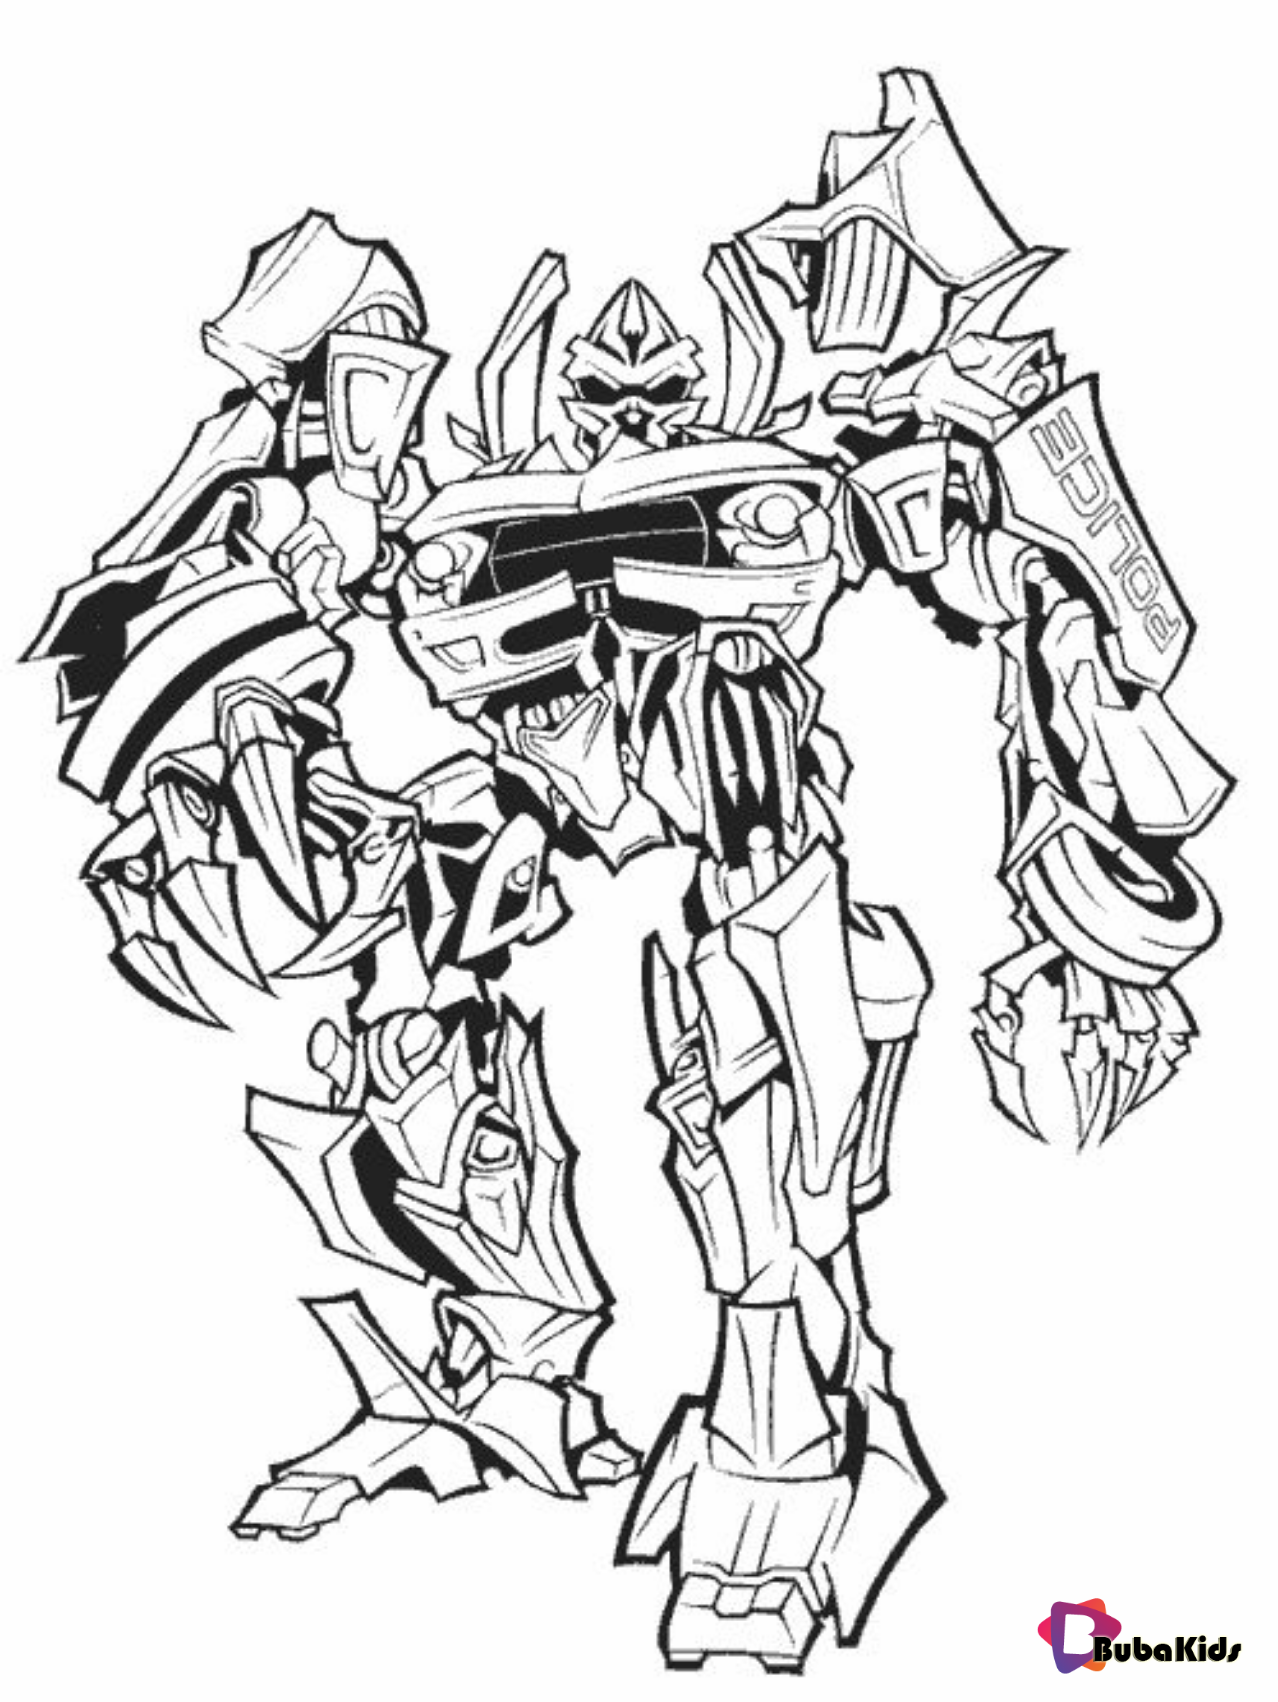 Transformer coloring pages and printable on bubakids.com